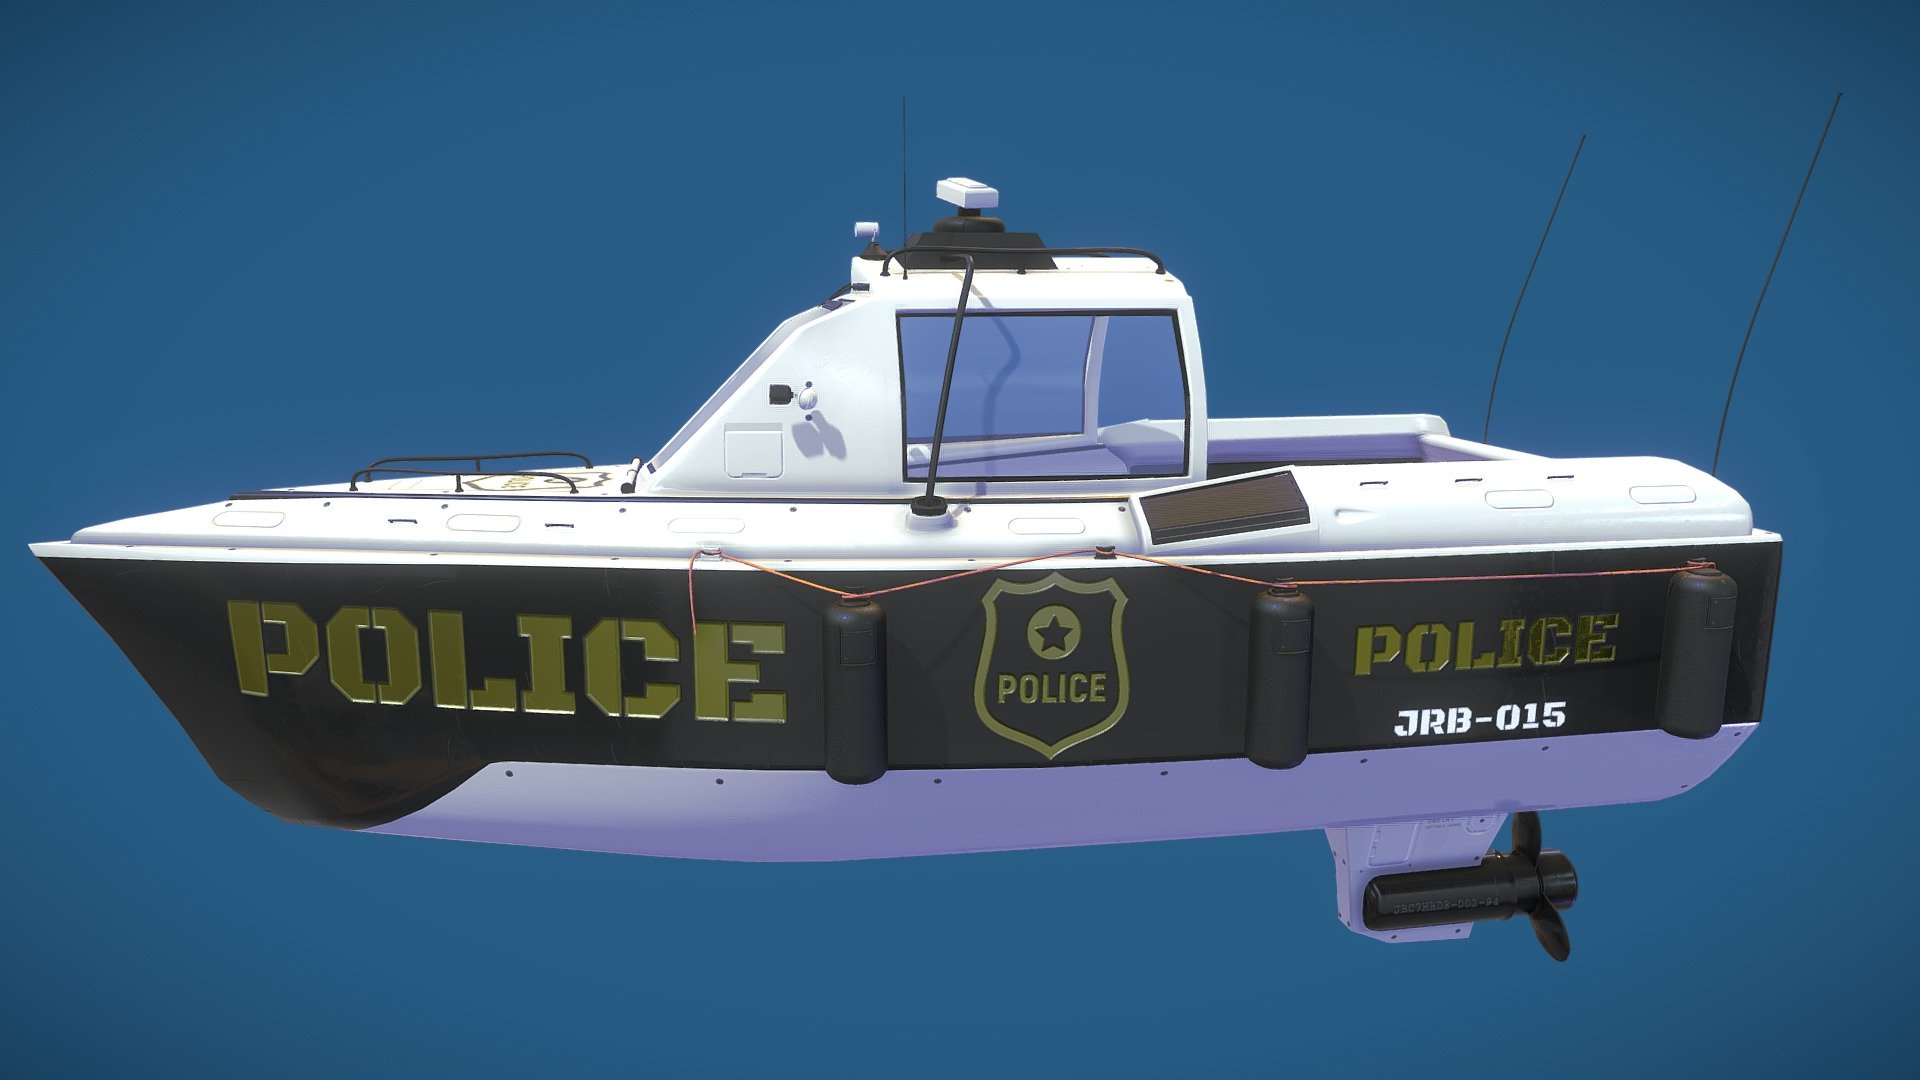 Police Predator - 70k Faces 136k Tri's

Intended to be used in a realitime engine or similar project. Not intended for uses such as 3D Printing.

Select textures are 4k, others are smaller depending on value. All textures used PBR Metallic Roughness.

UV's are unwrapped, not overlapping and laid out in a single UV tile.

Modelled in Maya 2020, textured in Substance Painter 2021.1.0 

The model itself is comprised of a hierarchy of seperated objects. Anything can be easily removed or added without destruction.

Included in the extras ZIP is the substance painter project file, the maya scene file, as well as the used FBX File 3d model